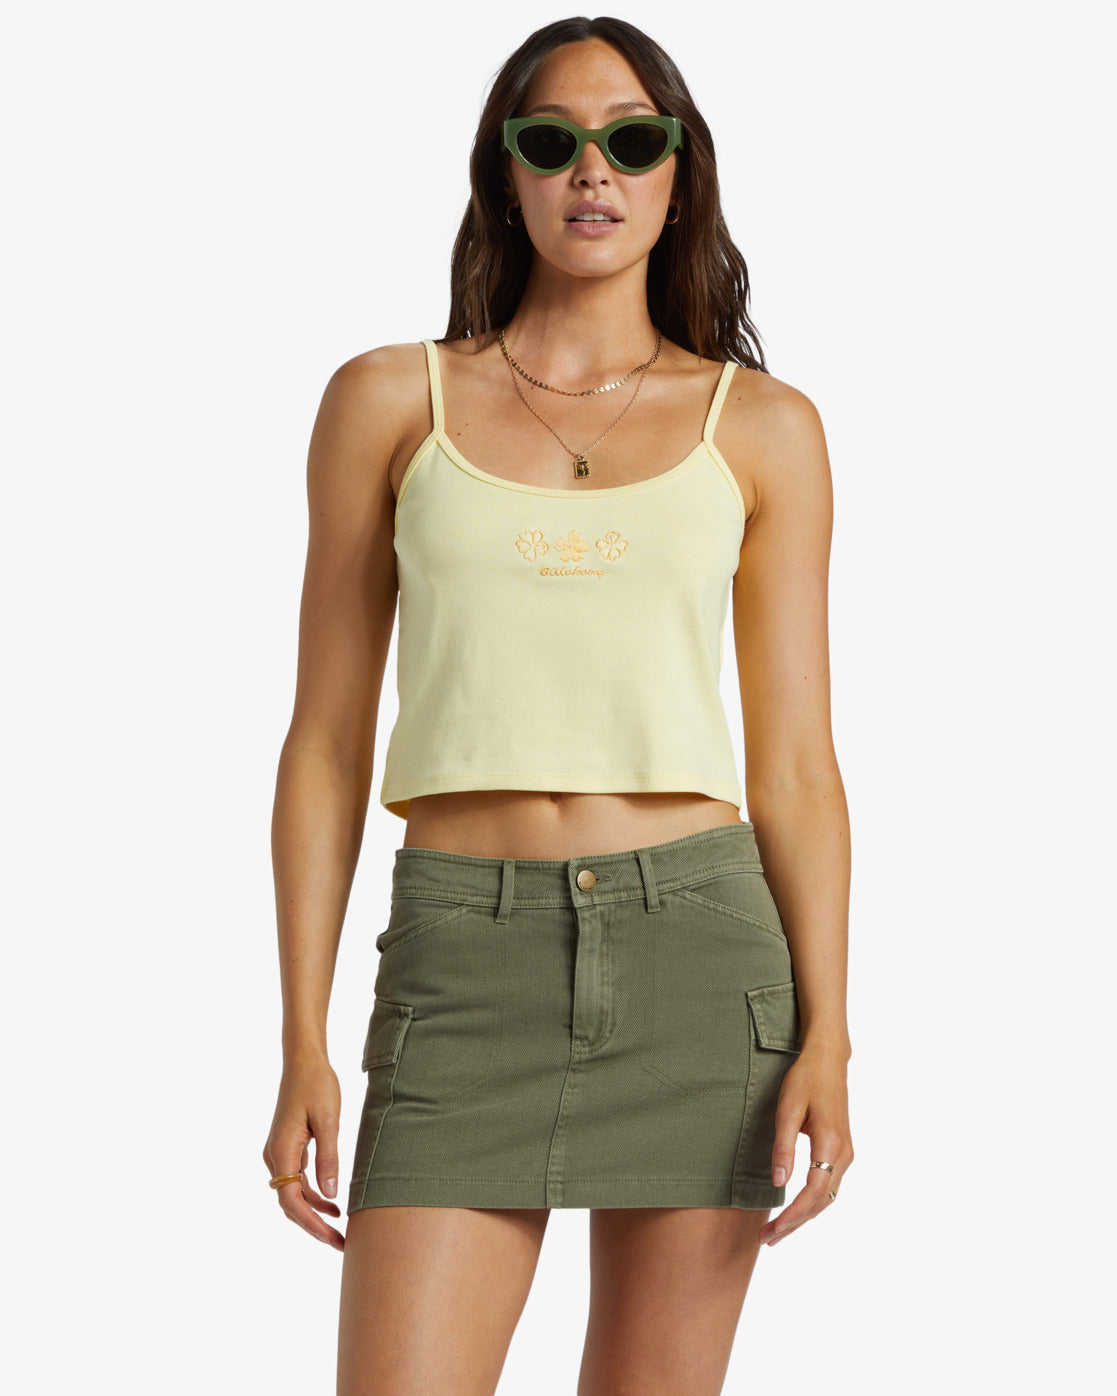 Billabong's Hilary Cargo Skirt in the color Canteen